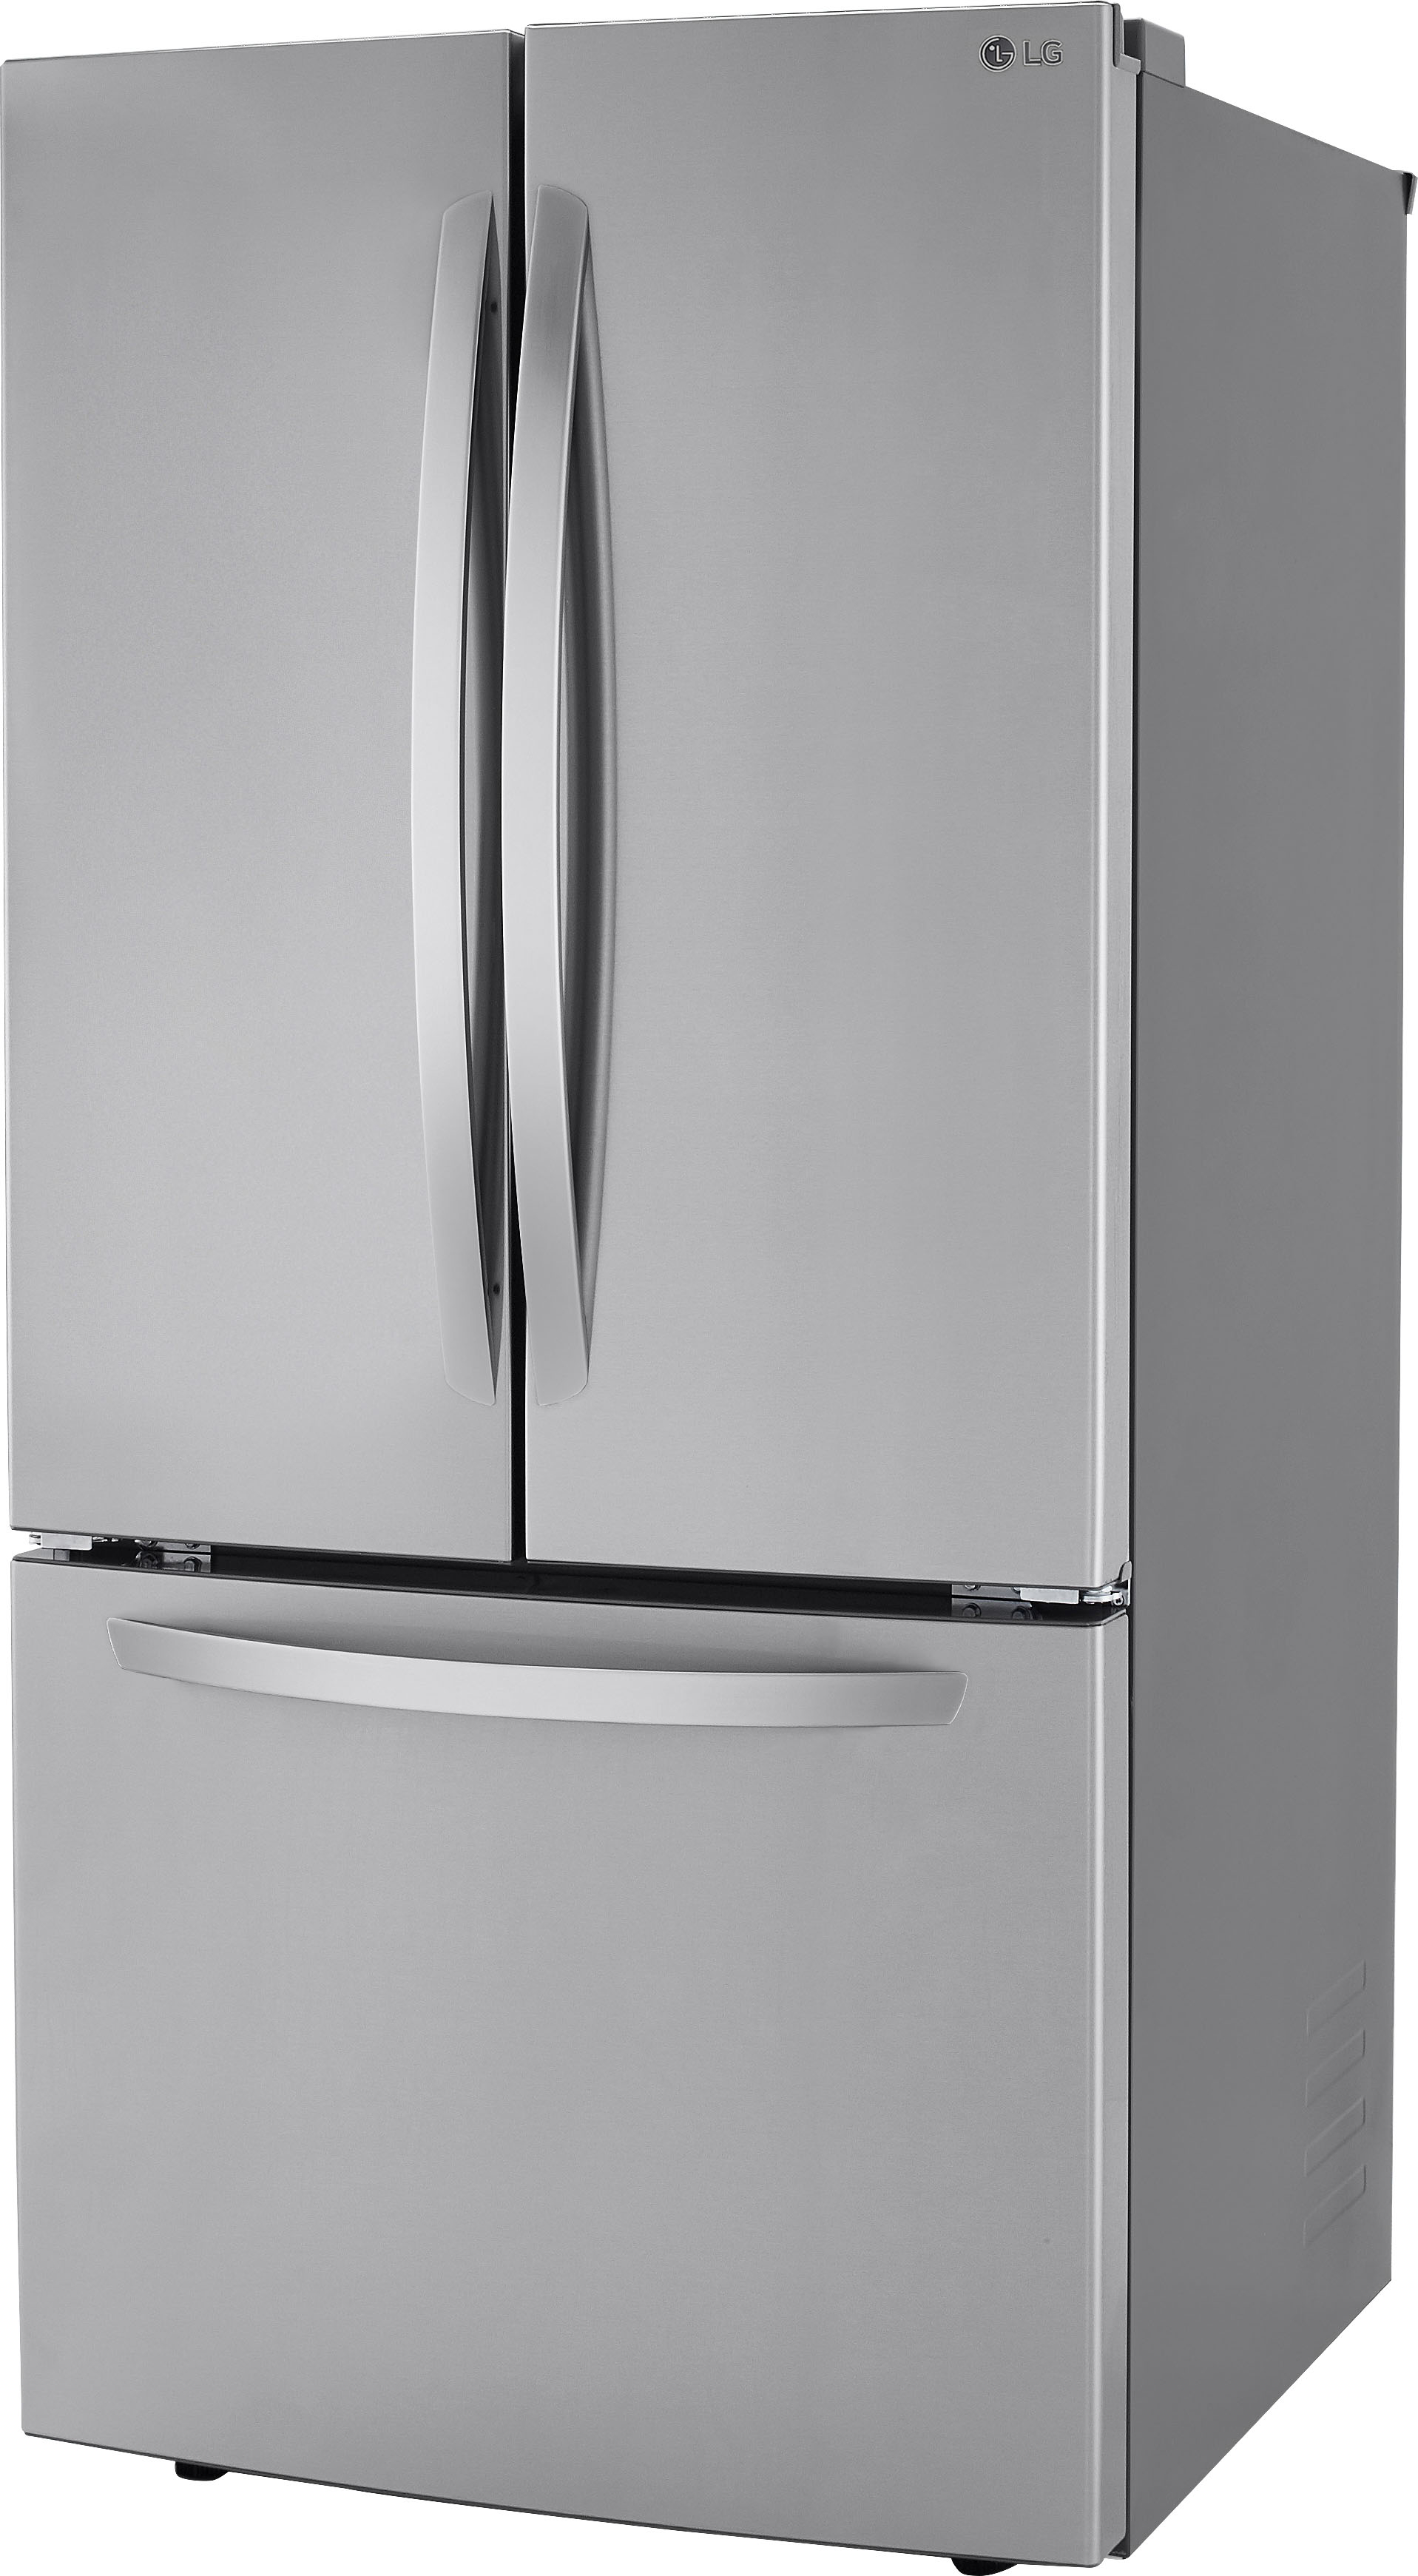 Left View: LG - 25.1 Cu. Ft. French Door Refrigerator with Ice Maker - Stainless steel